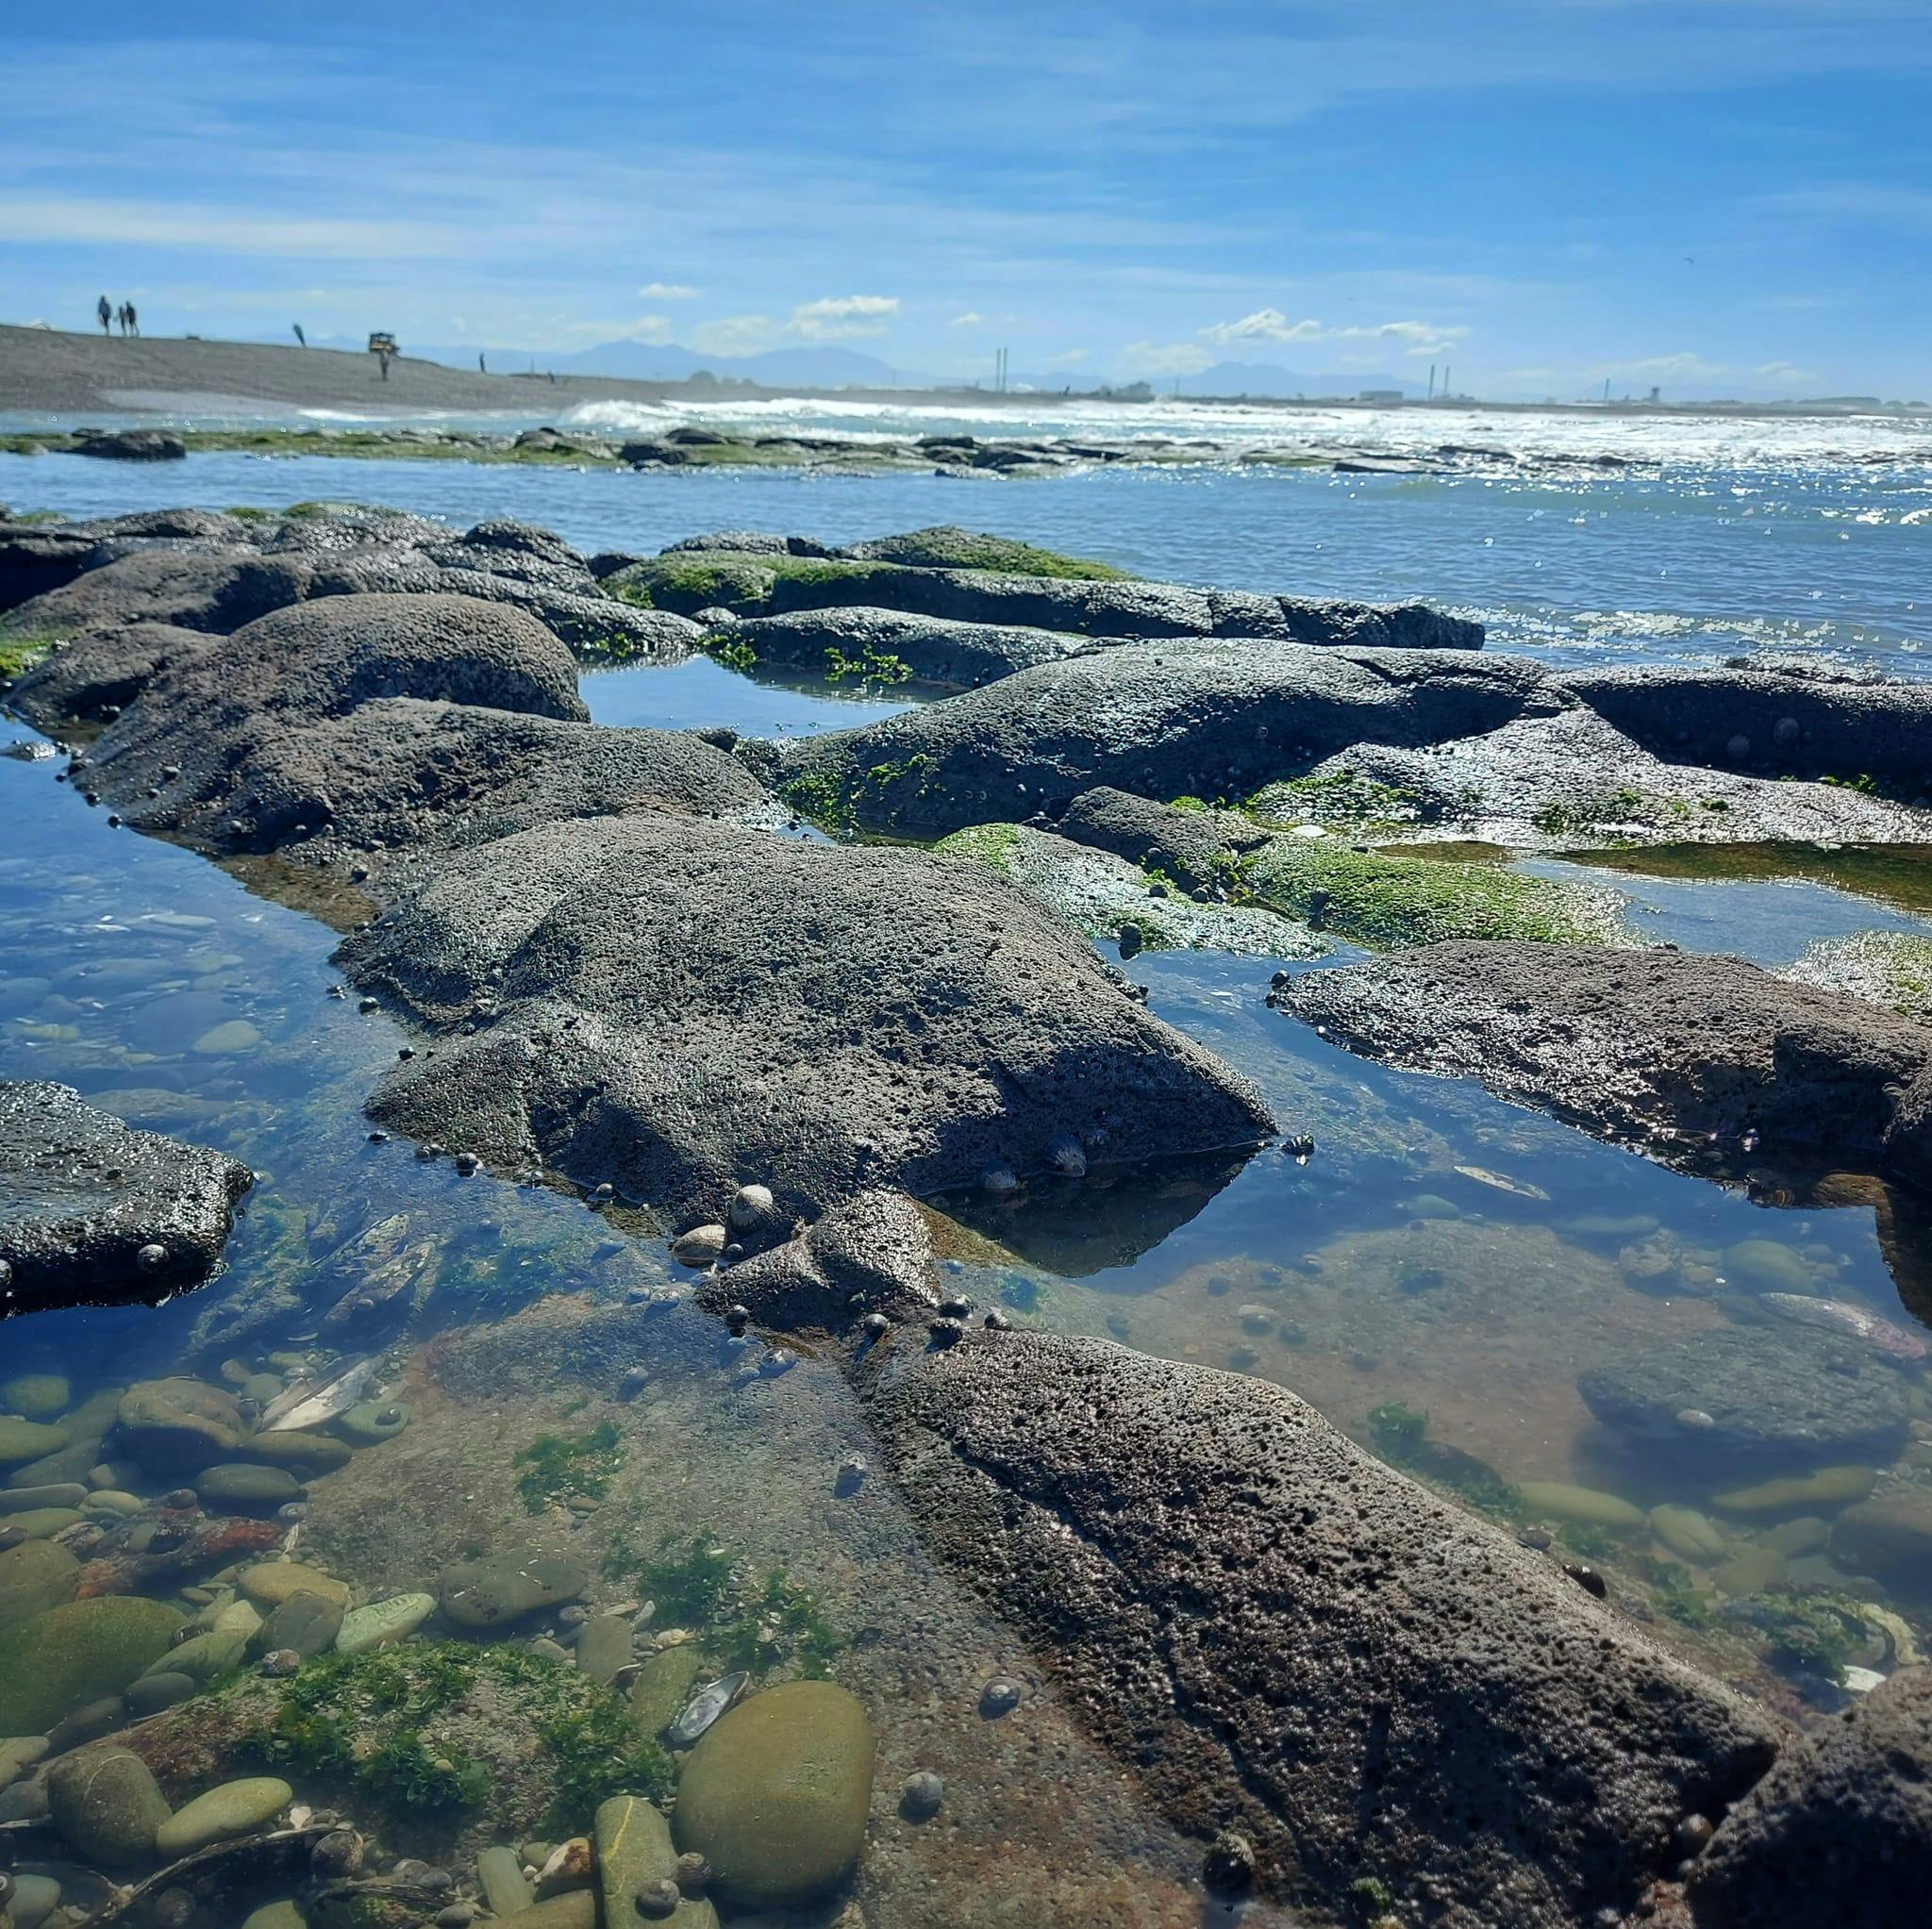 The basalt reef at Waitarakao Lagoon is home to many creatures in its rock pools